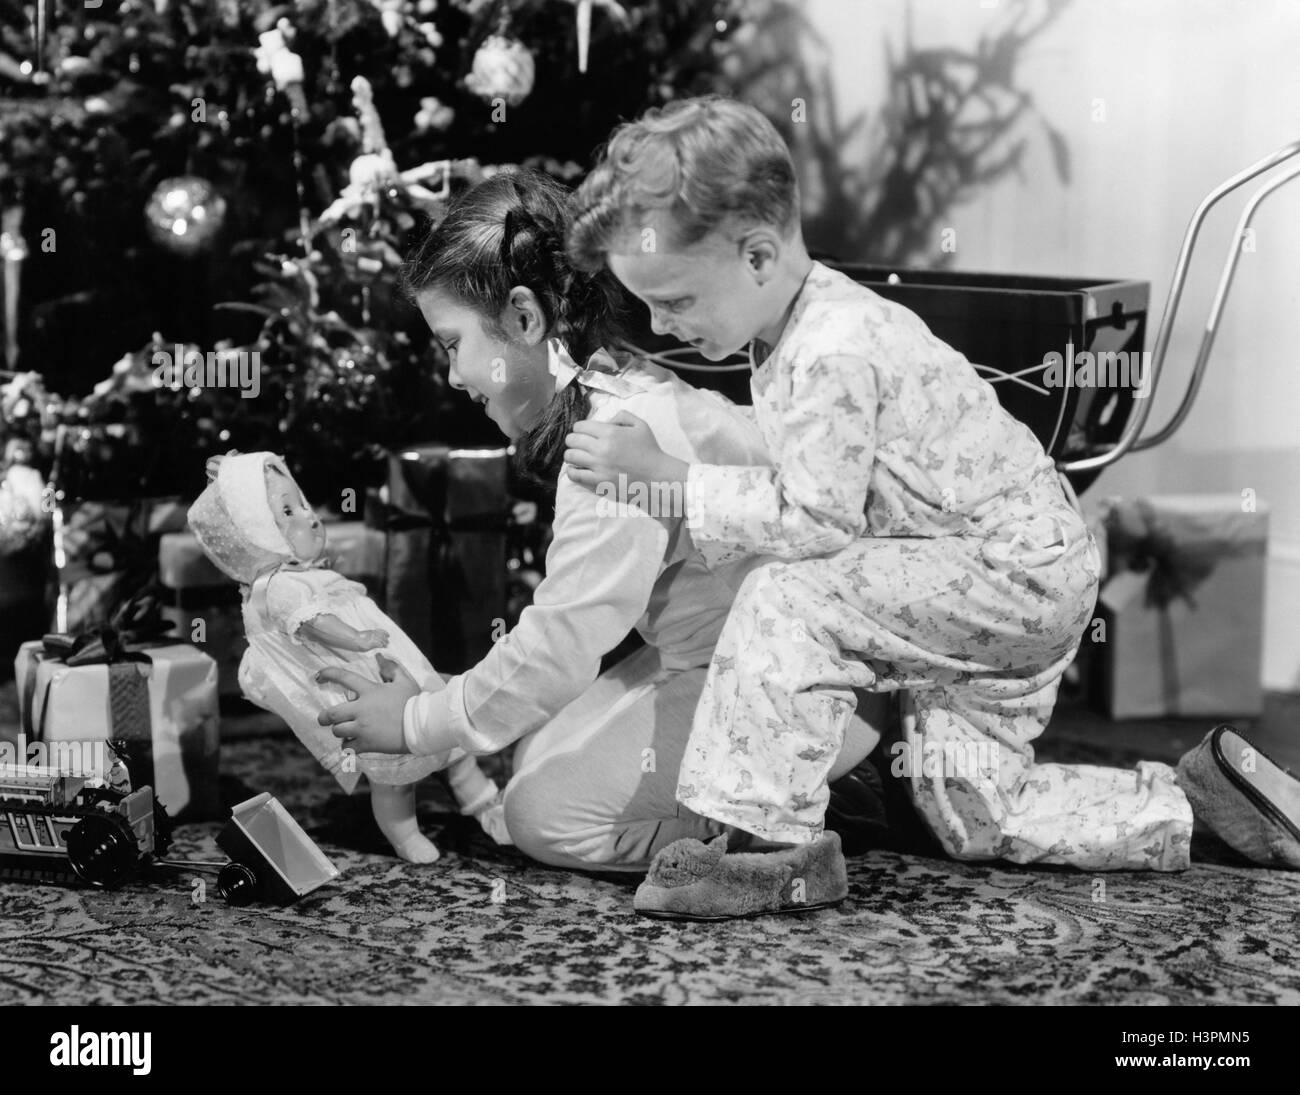 1940s BOY GIRL BROTHER SISTER LOOKING AT PRESENTS UNDER CHRISTMAS TREE GIRL HOLDING BABY DOLL Stock Photo